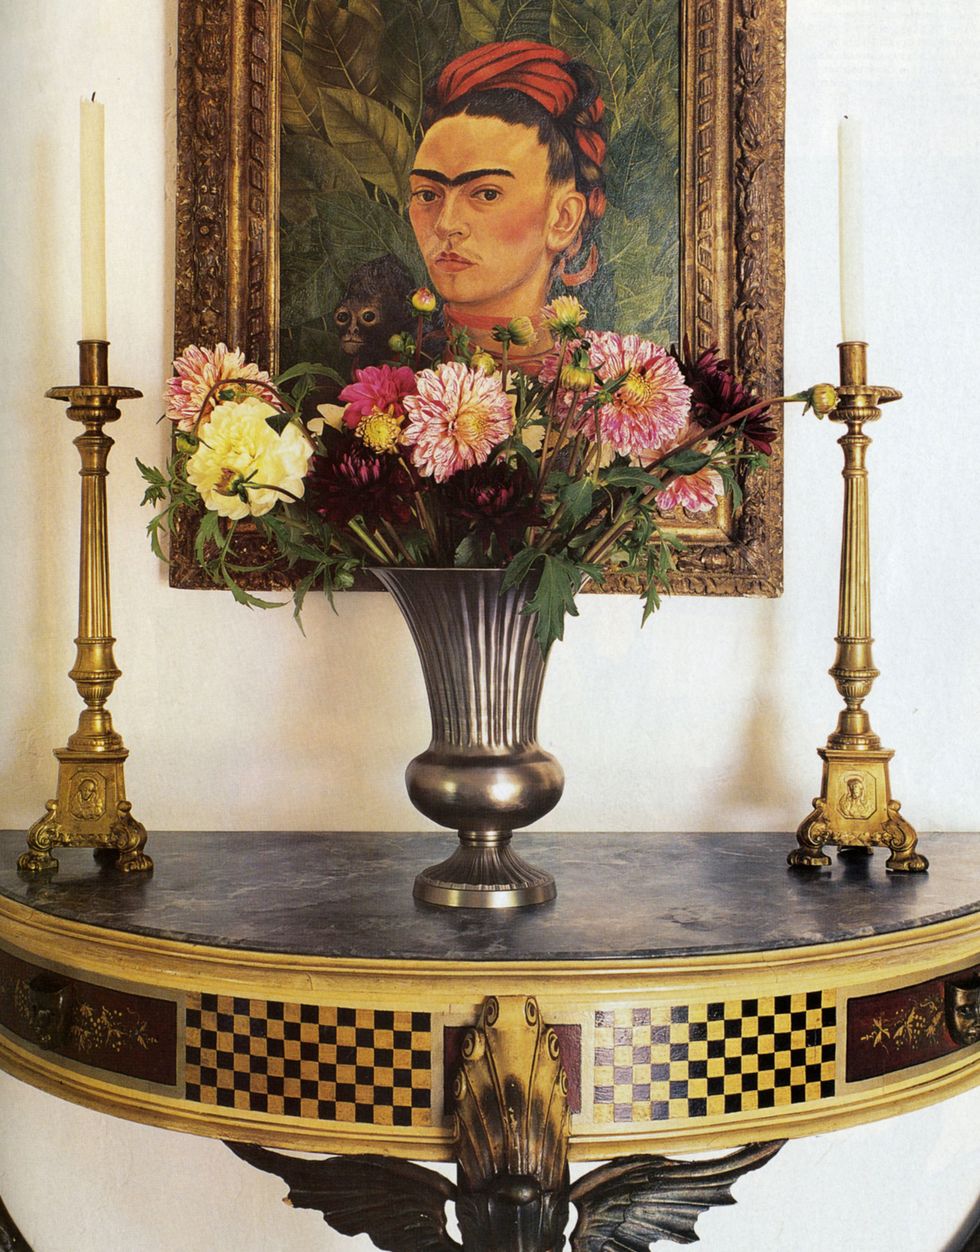 entryway with frida kahlo portrait hangs over a russian inlay demilune table with a pair of gold candlesticks and a bouquet of flowers between them